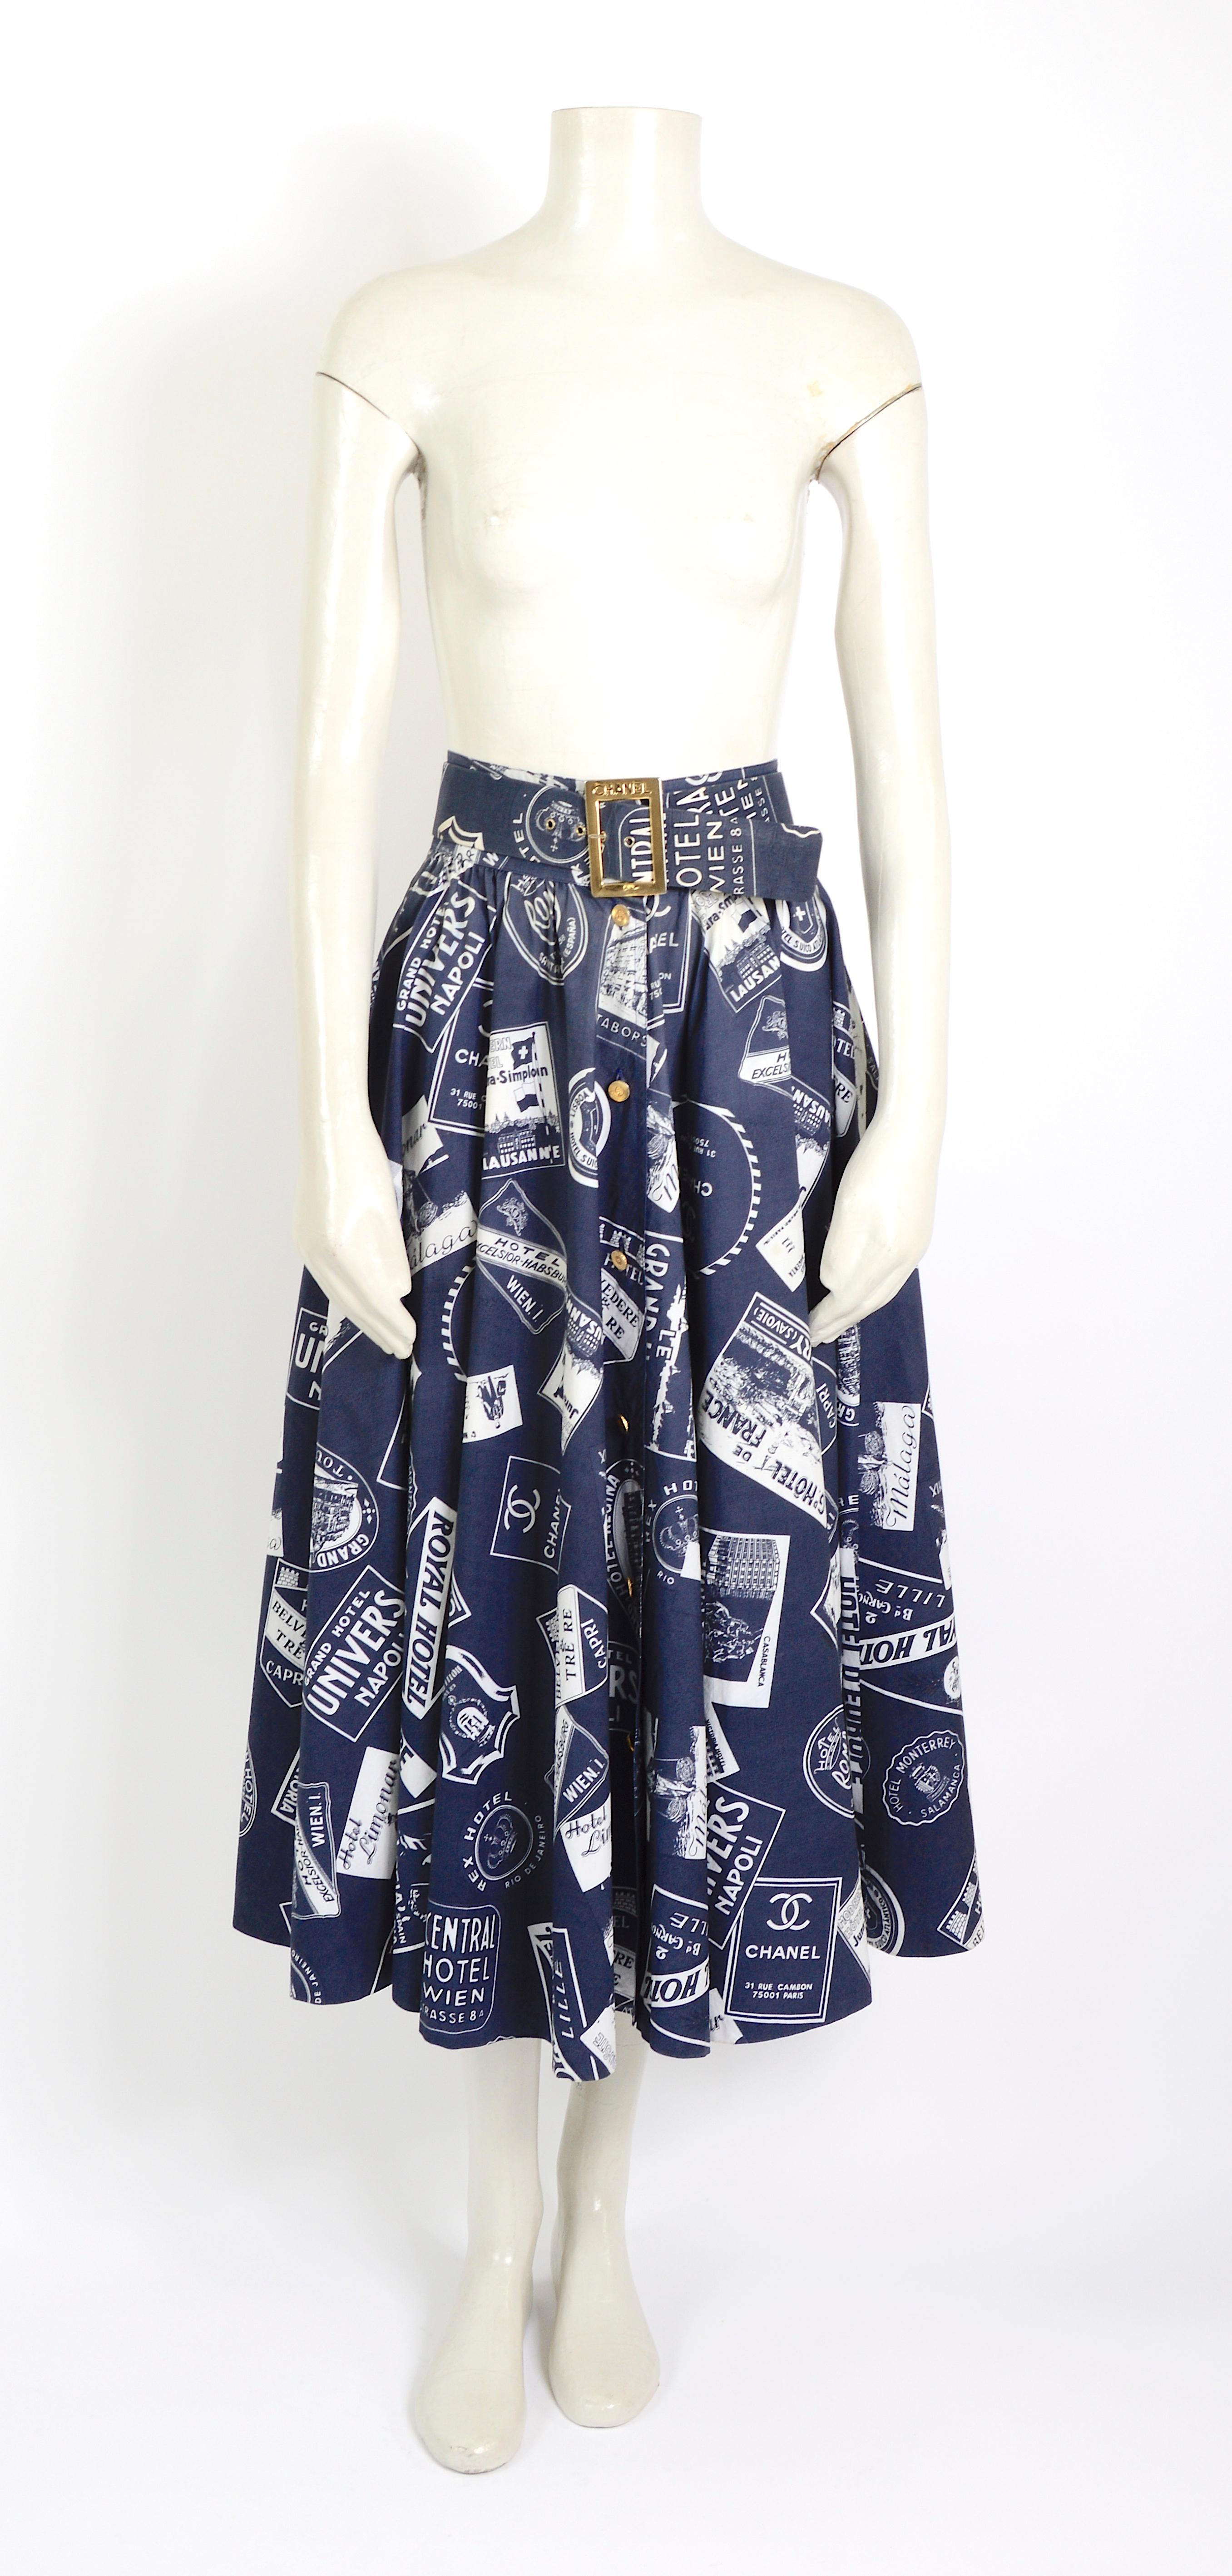 Chanel's spring-summer 1989 collection iconic and collectible rare skirt that features the iconic graphic 